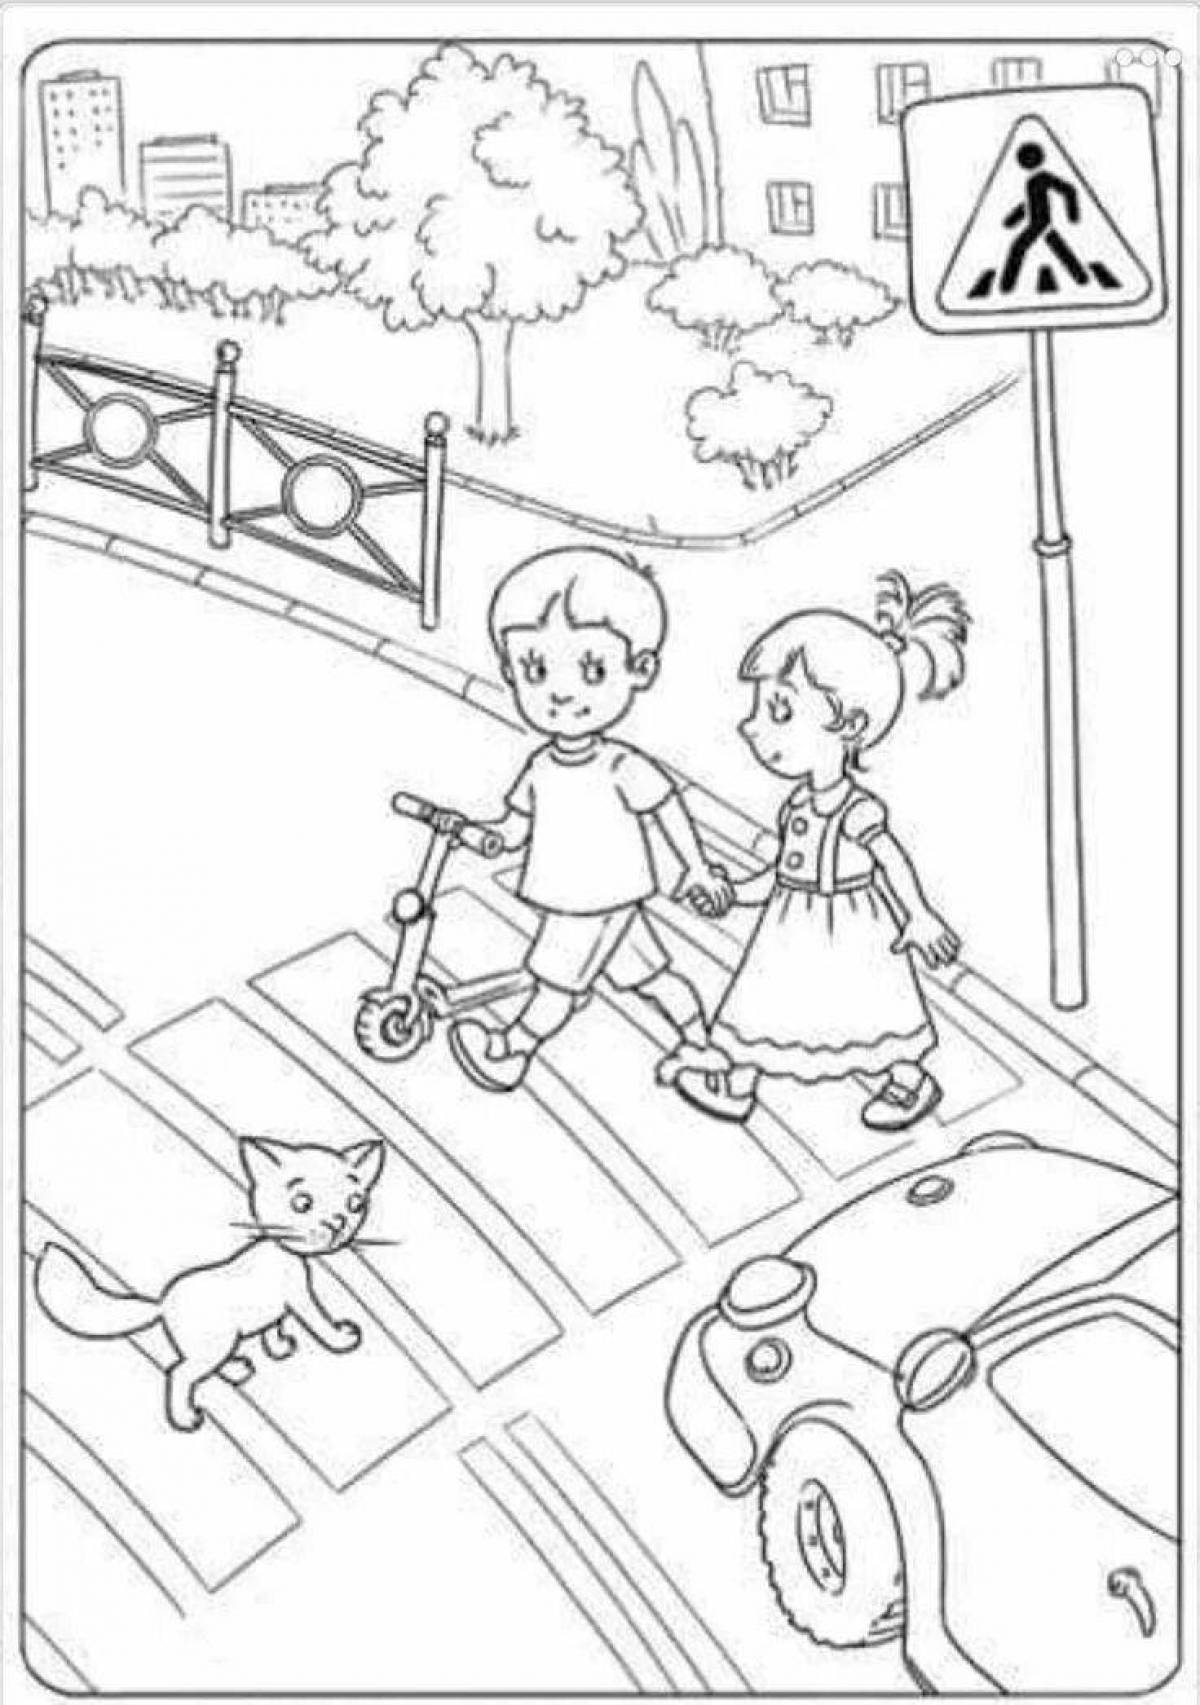 Coloring book incredible rules of the road